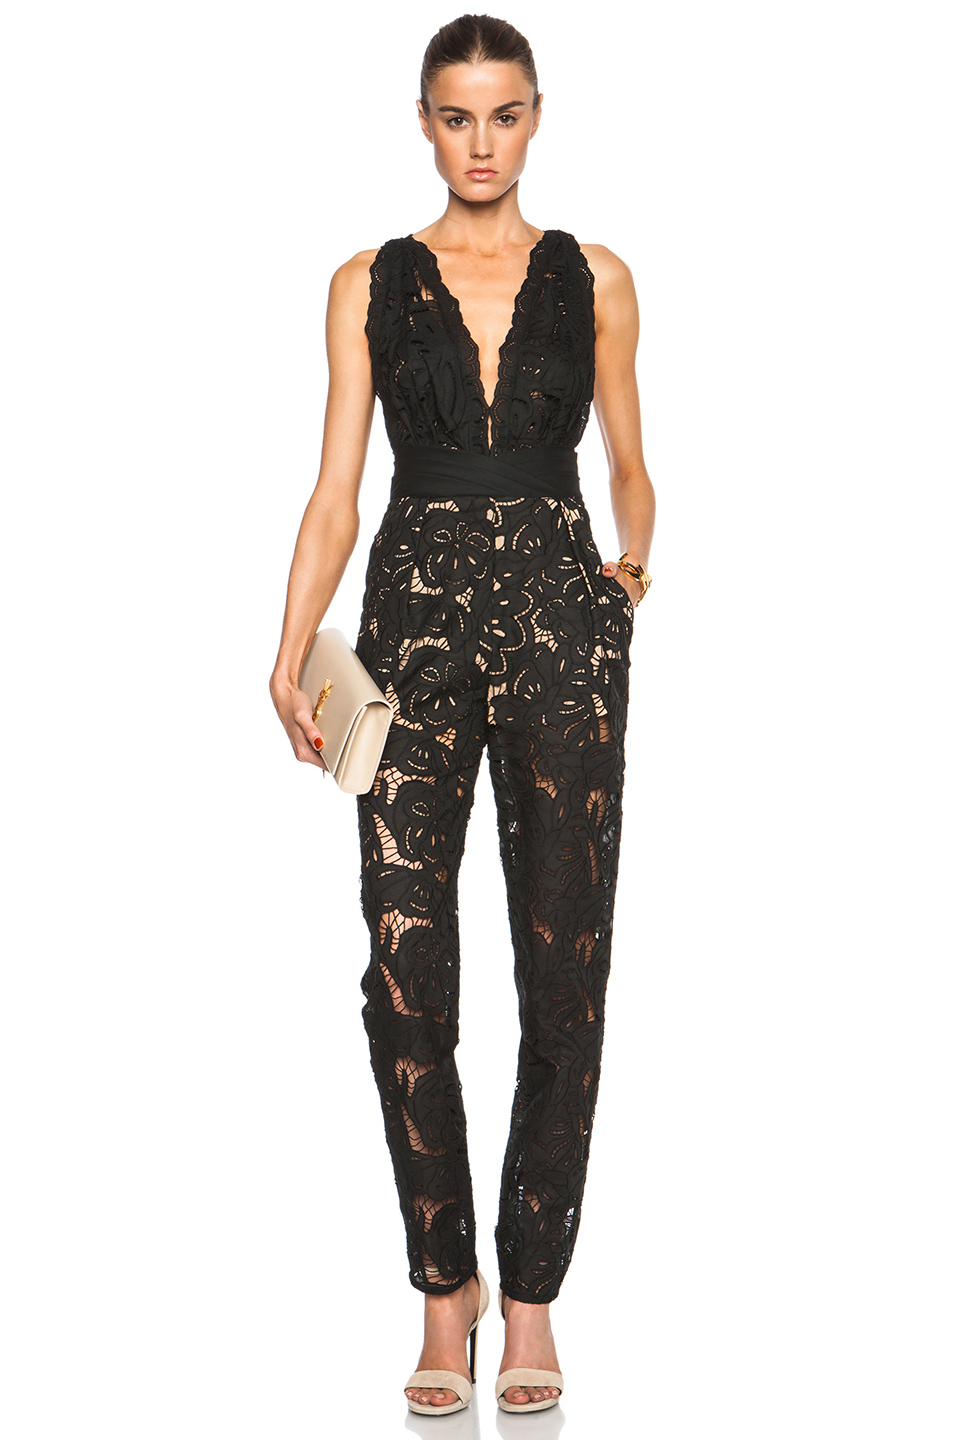 Lyst - Zuhair Murad English Embroidery Jumpsuit in Black